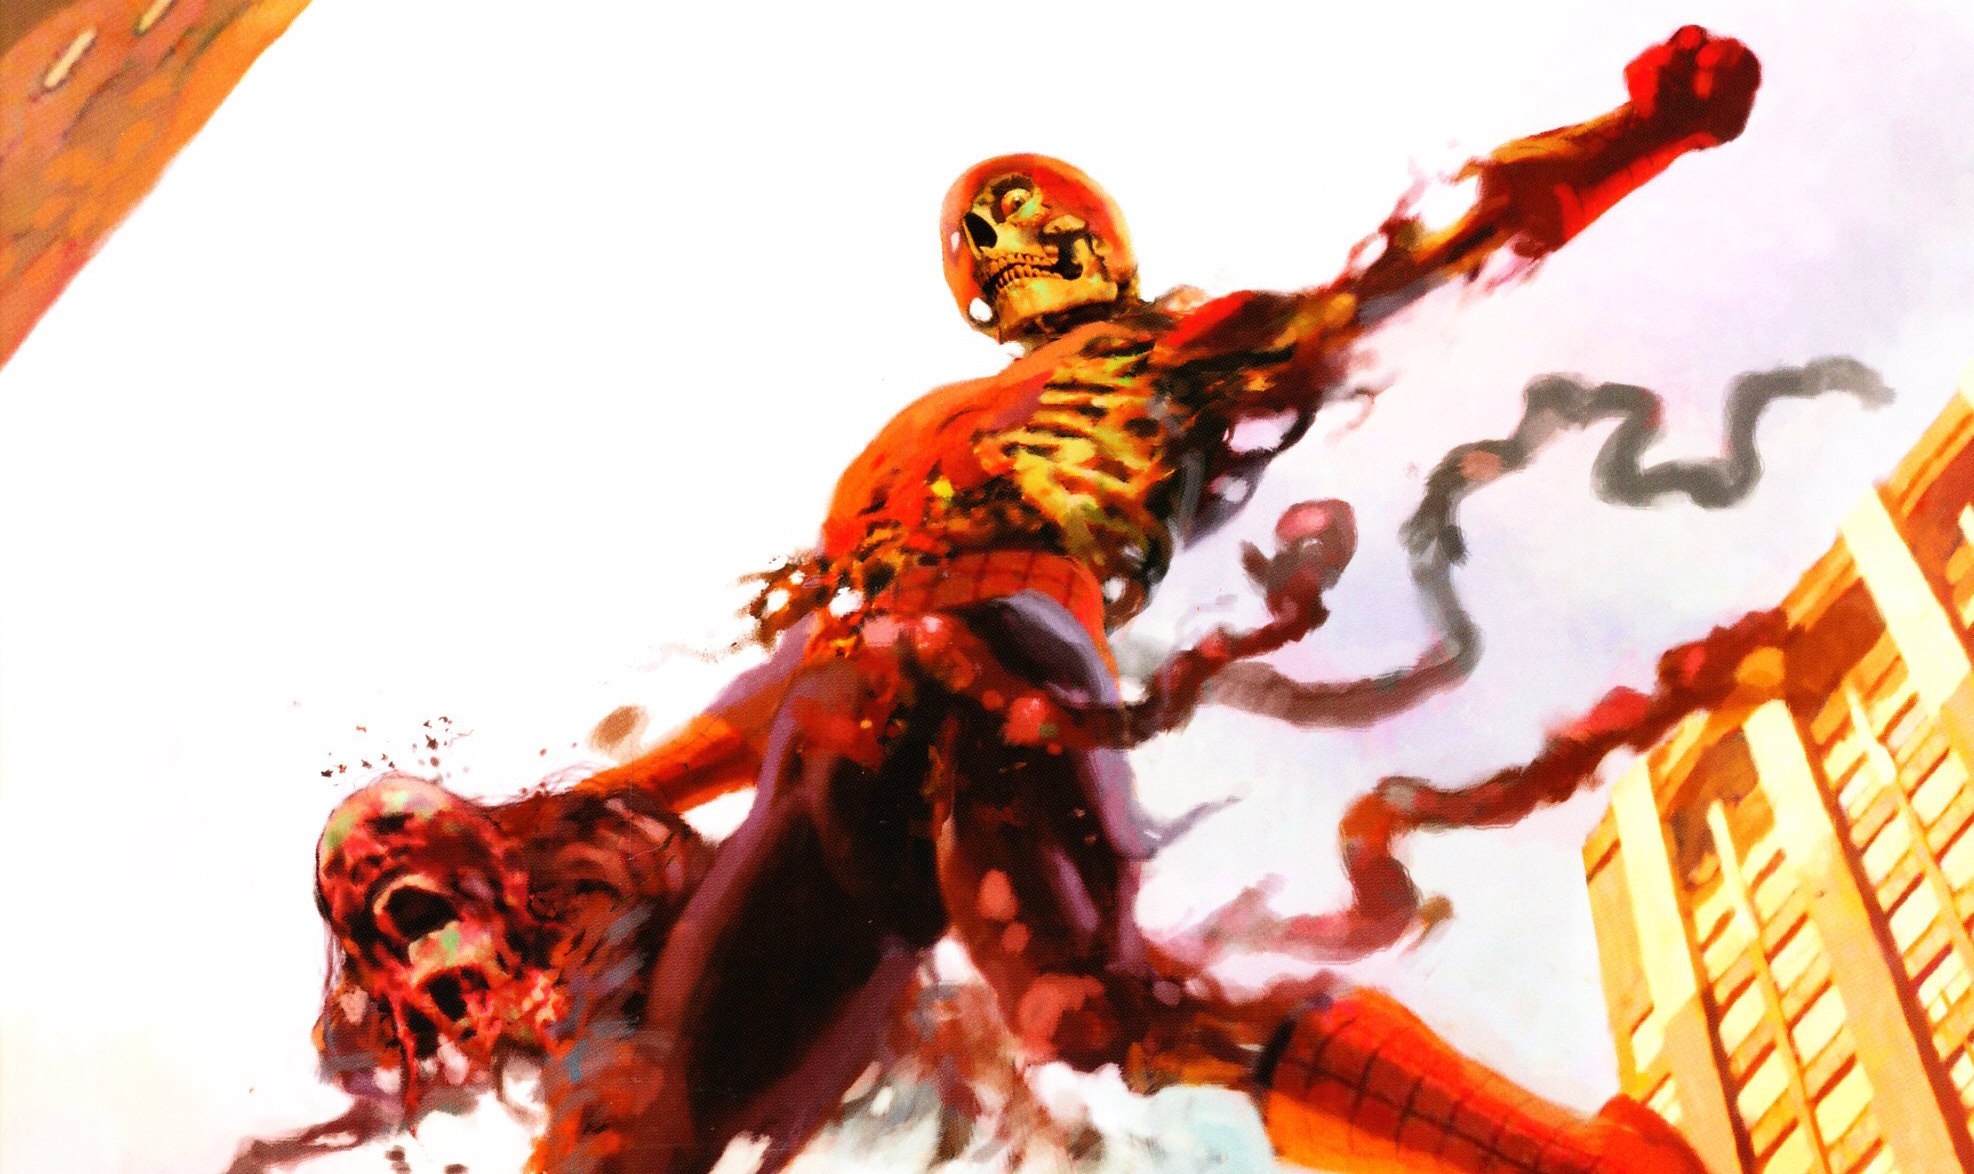 Marvel Zombies Graphic Novel Review by Deffinition as part of Graphic Novel Talk